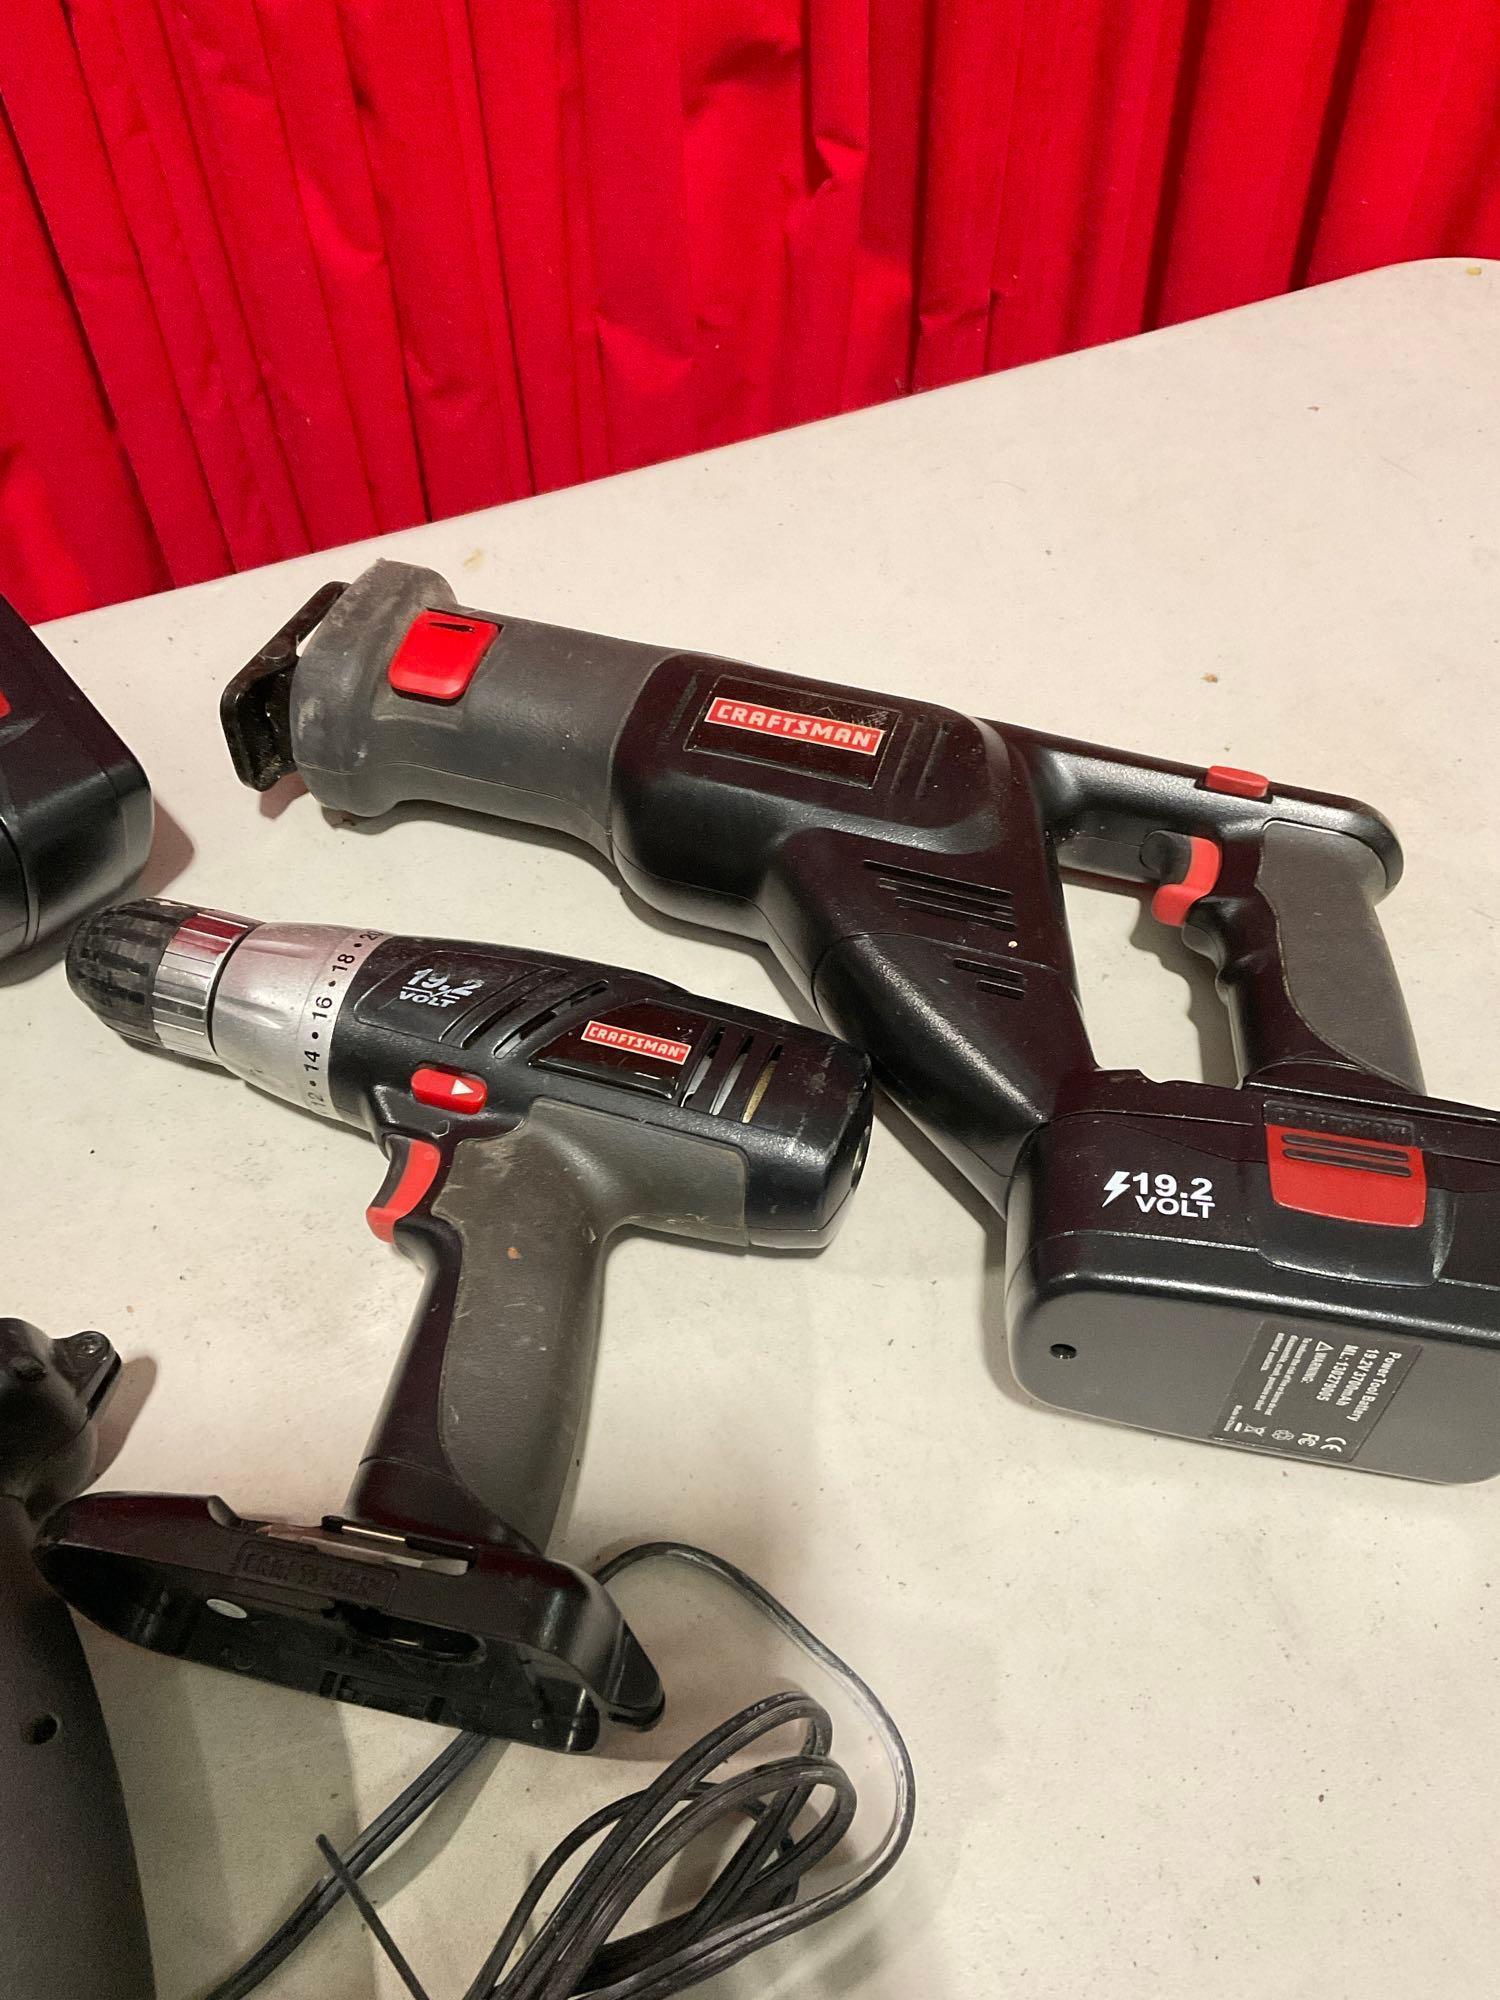 Collection of Craftsman Electric Cordless Power Tools incl. Circular Saw, Reciprocating Saw, Drill,